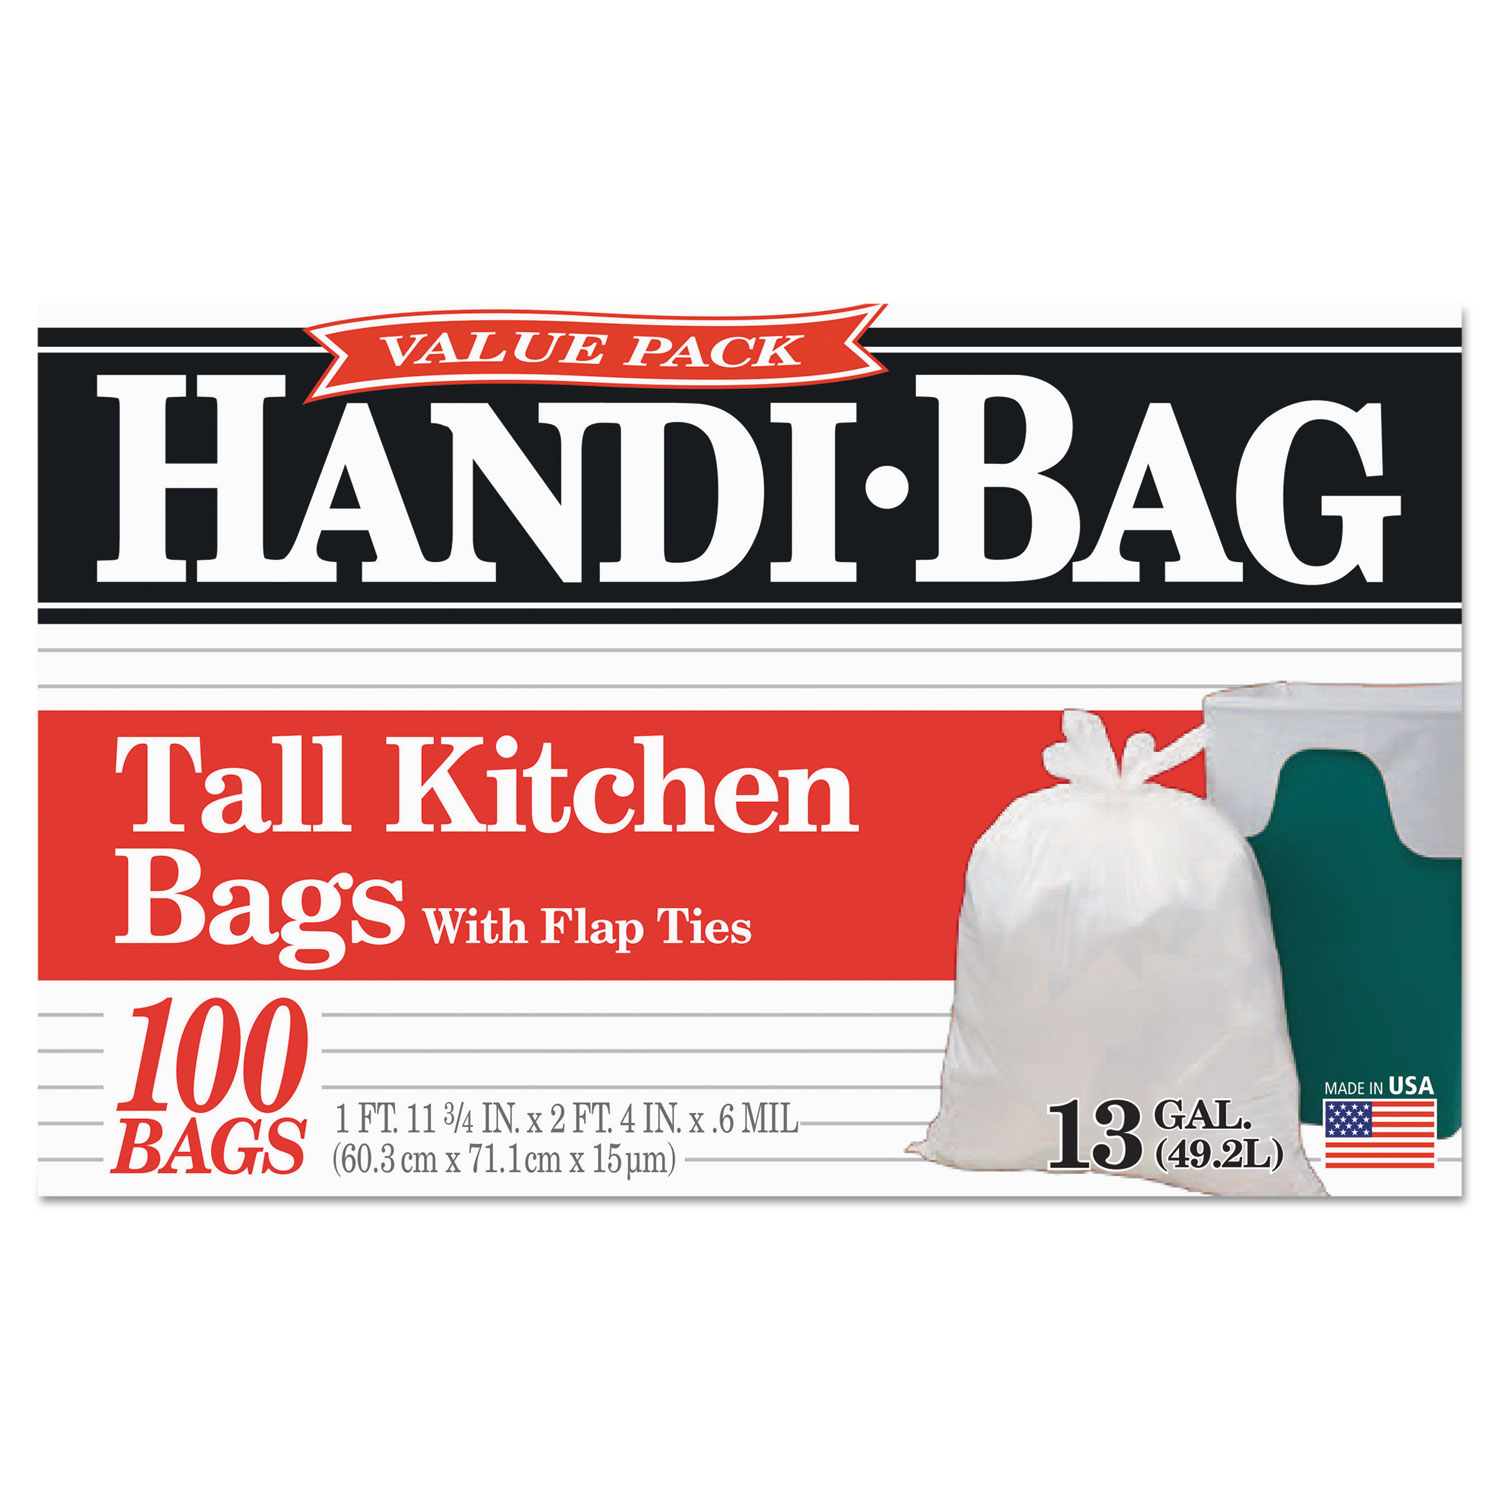 Handi-Wrap Sandwich Bags 40ct Zipper-wholesale -  - Online  wholesale store of general merchandise and grocery items